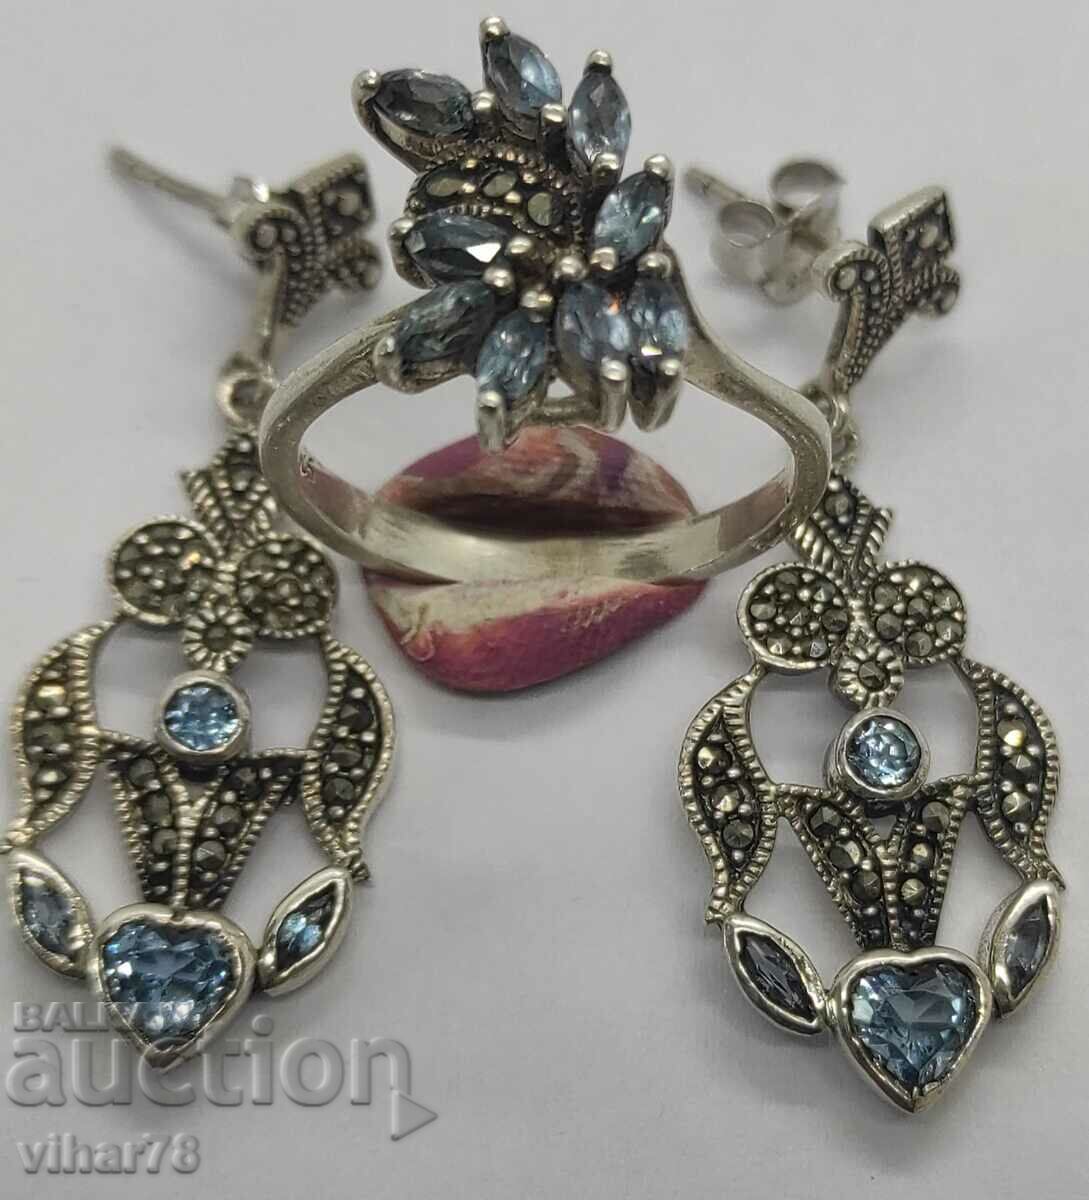 Very beautiful silver earring and ring set